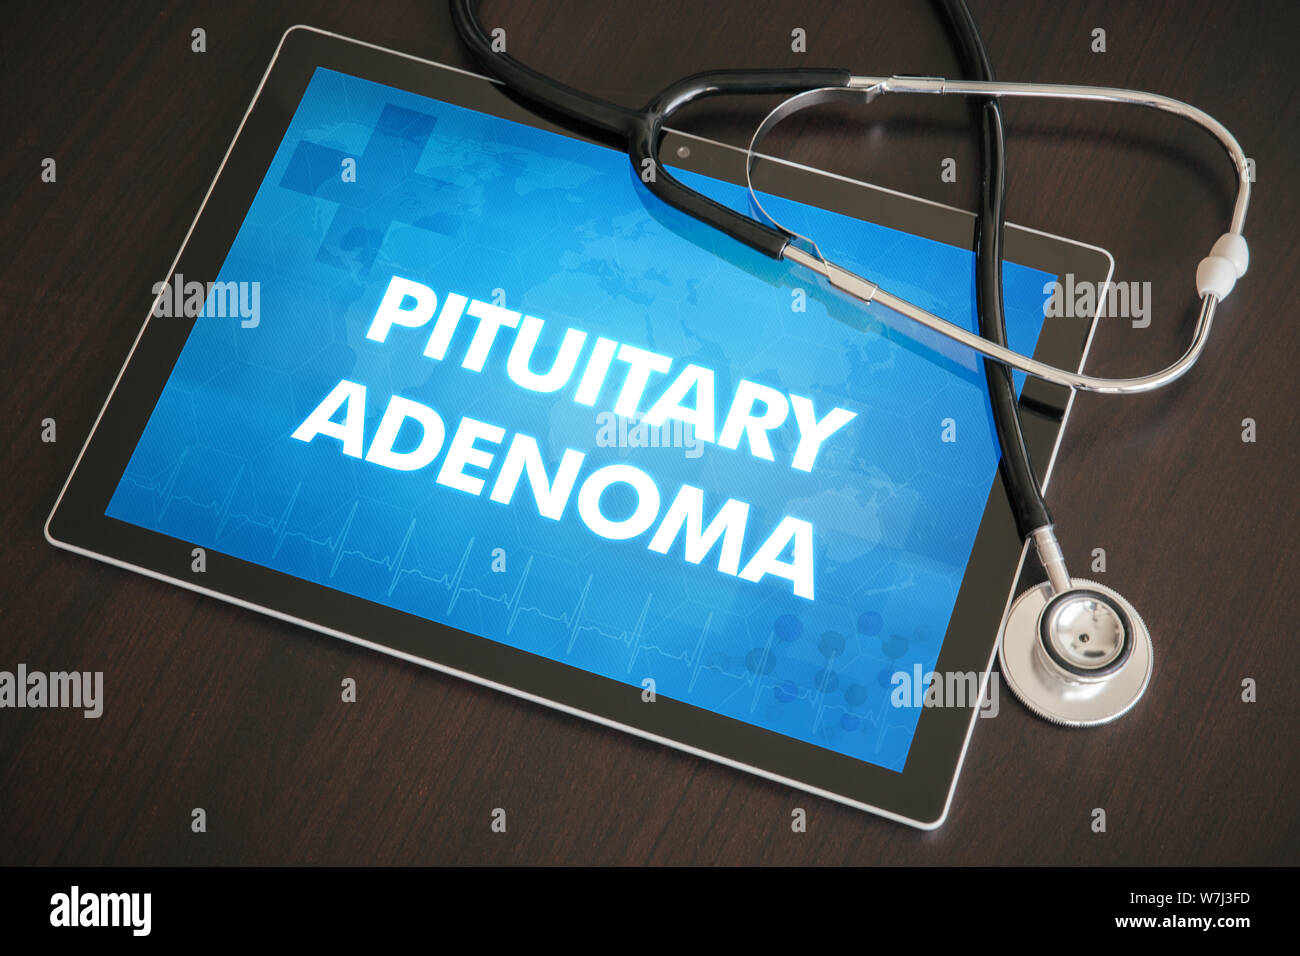 Pituitary adenoma (endocrine disease) diagnosis medical concept on tablet screen with stethoscope. Stock Photo